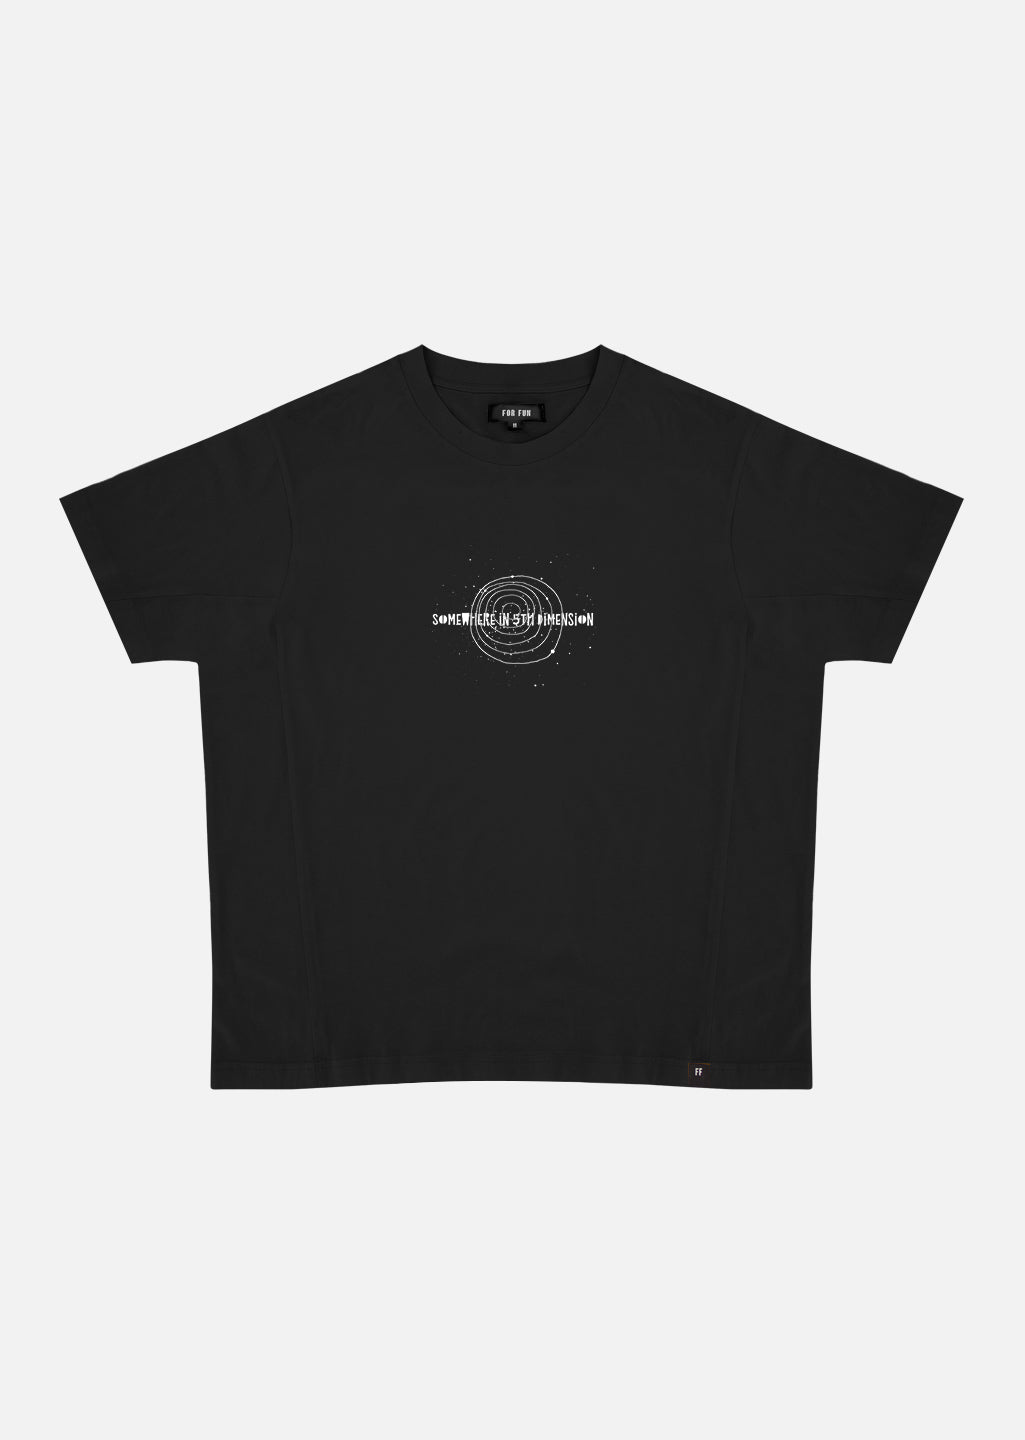 5th Dimension / Oversize T-shirt